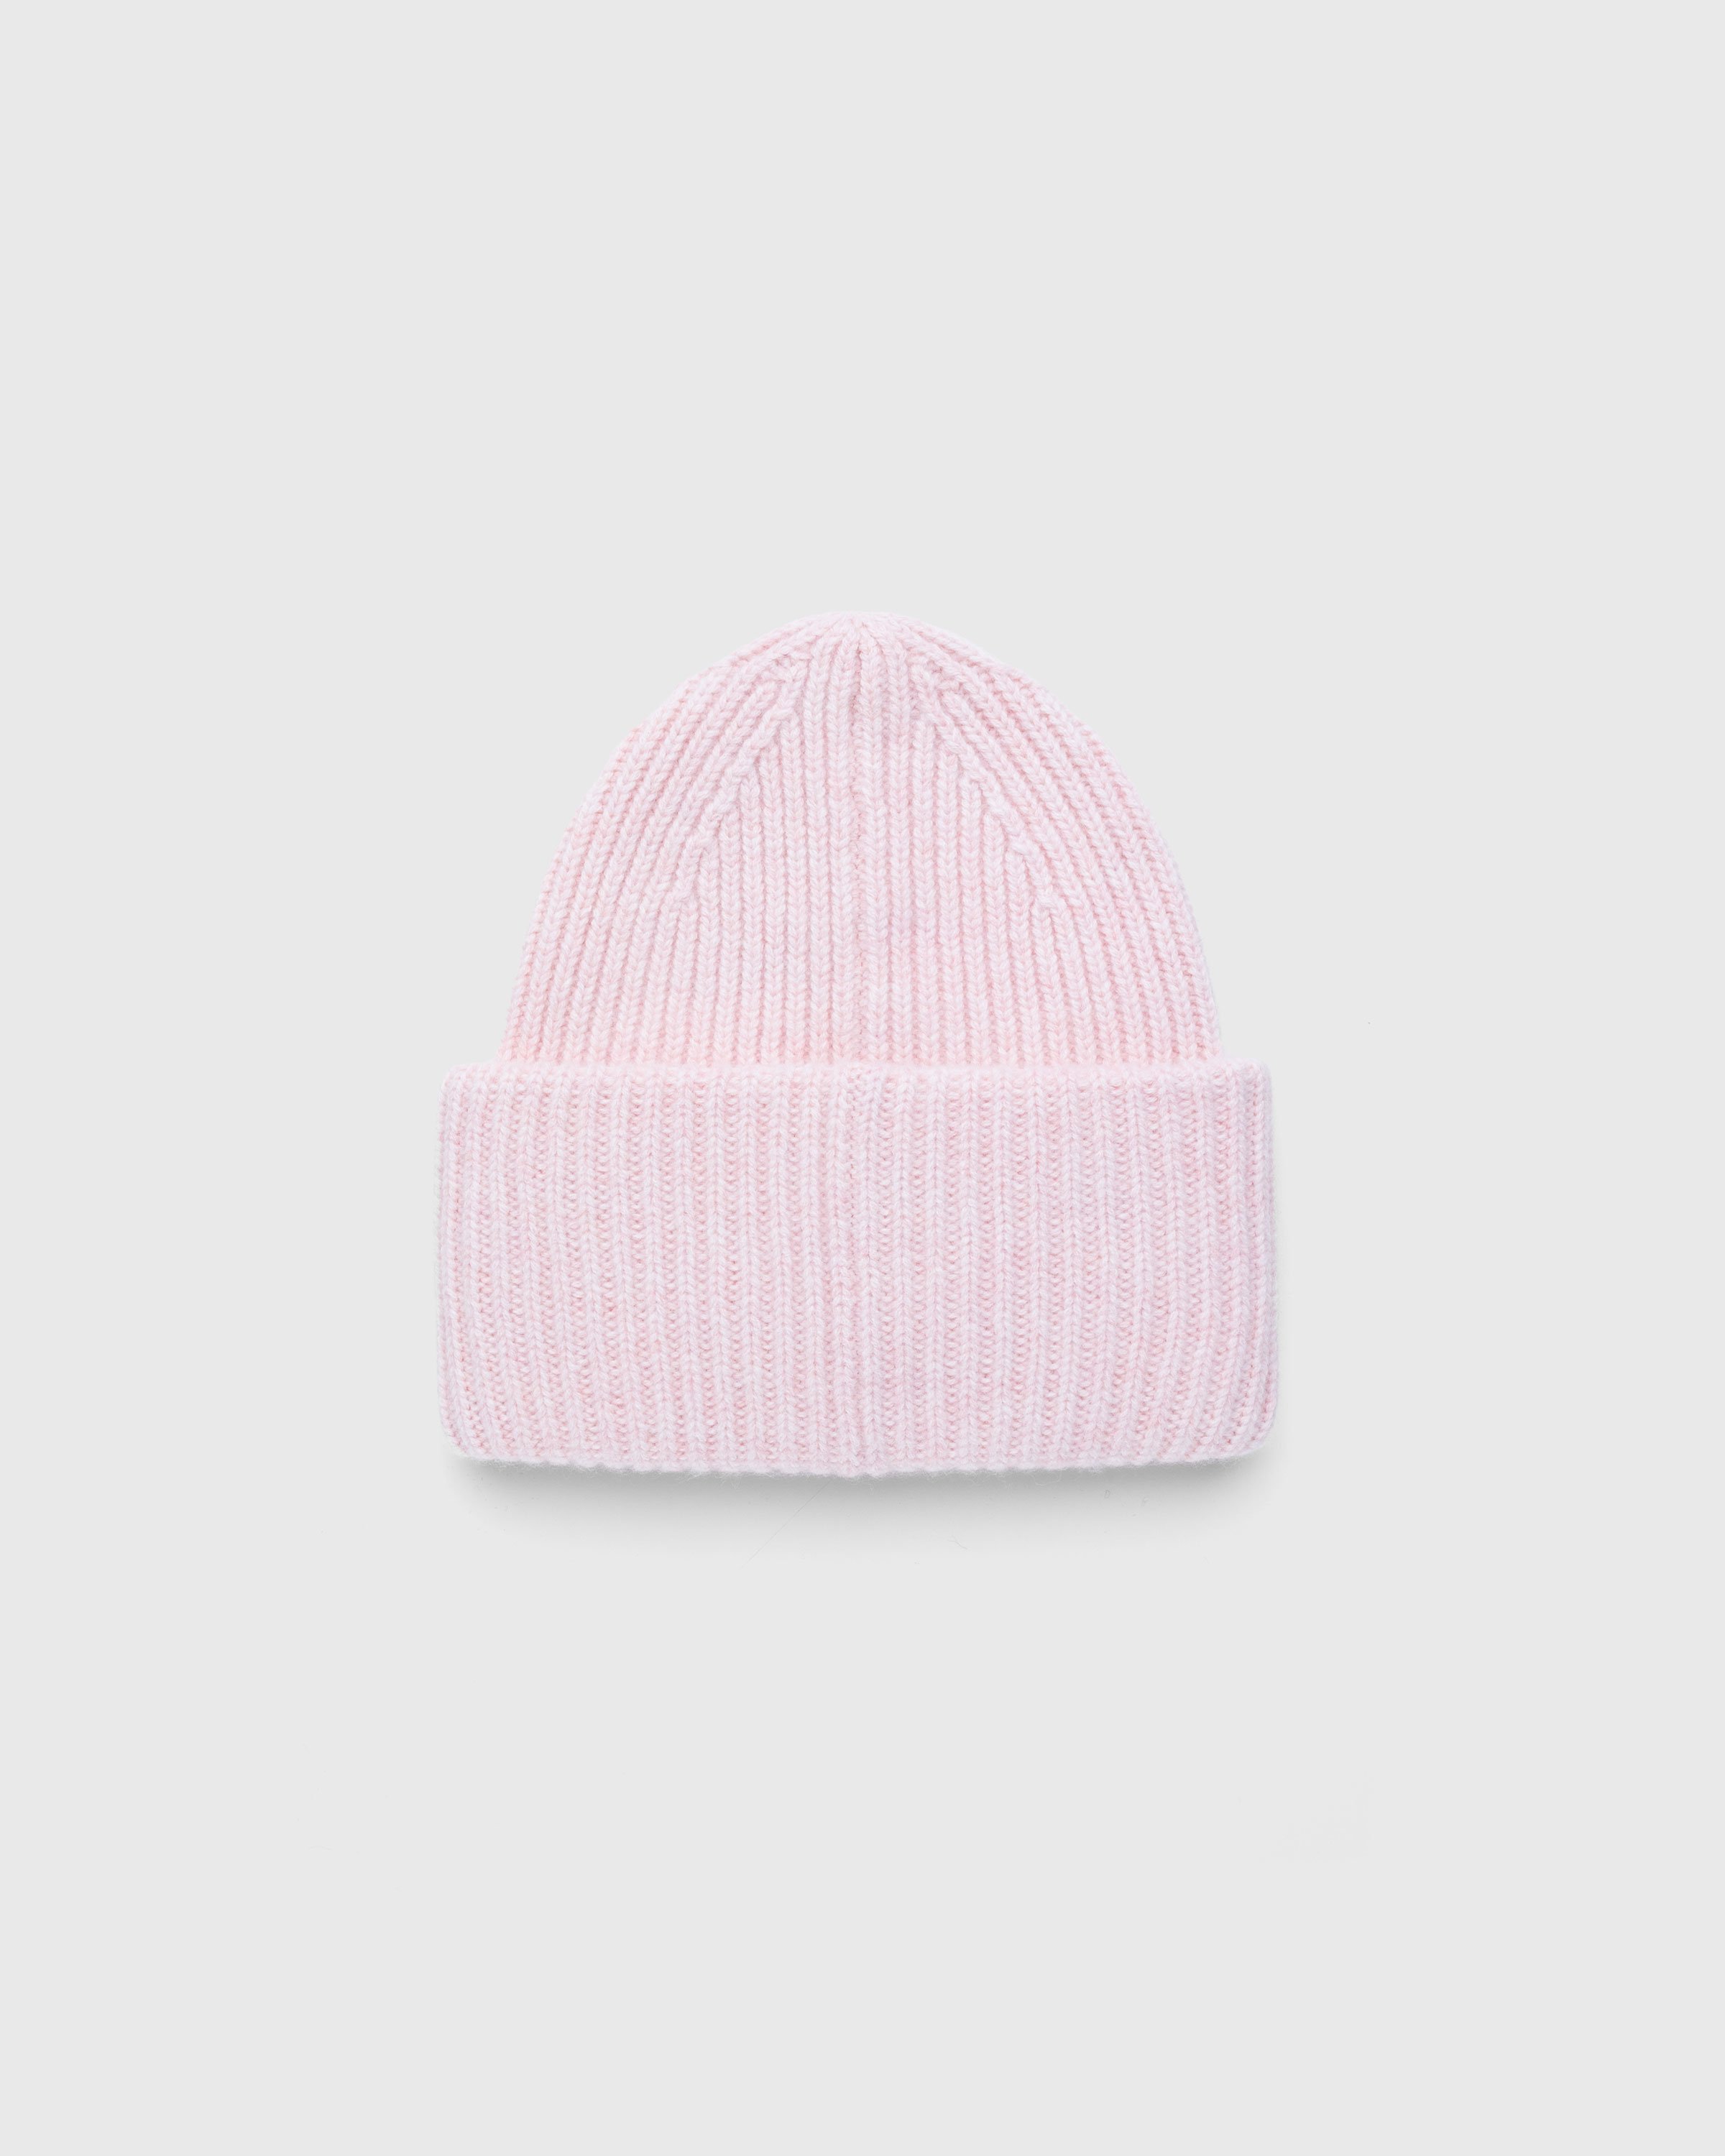 Acne Studios - Large Face Logo Beanie Pink - Accessories - Pink - Image 2